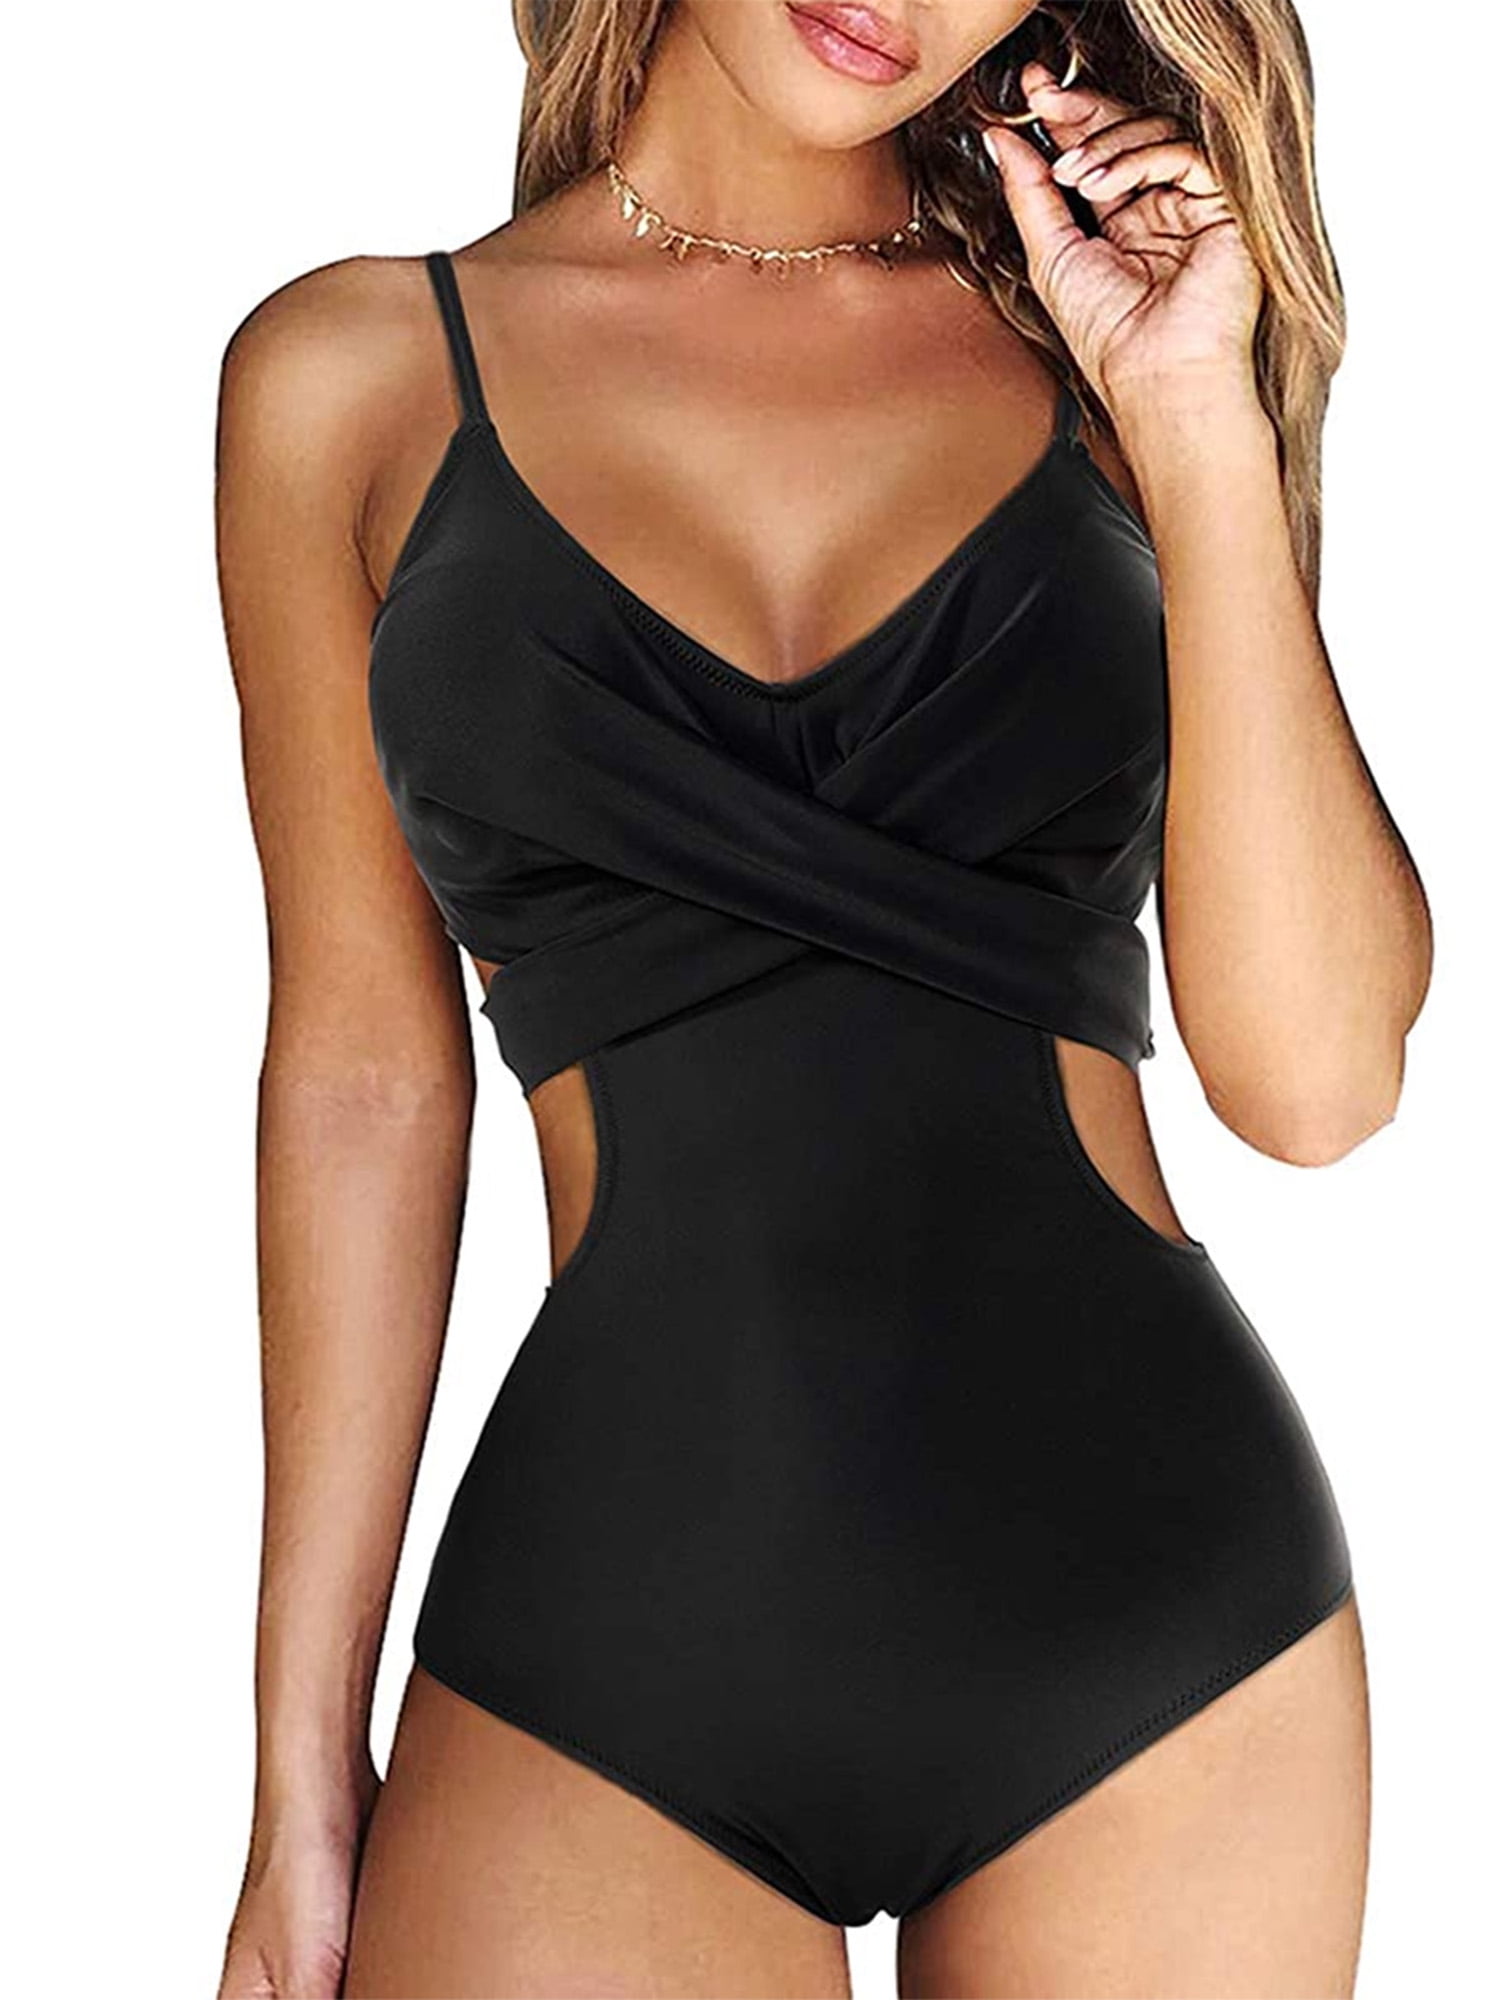 TFFR Women's One-piece Sling Swimsuit, Low V-neck Hollowed Waist Triangle Slim  Swimwear for Beach and Swimming 